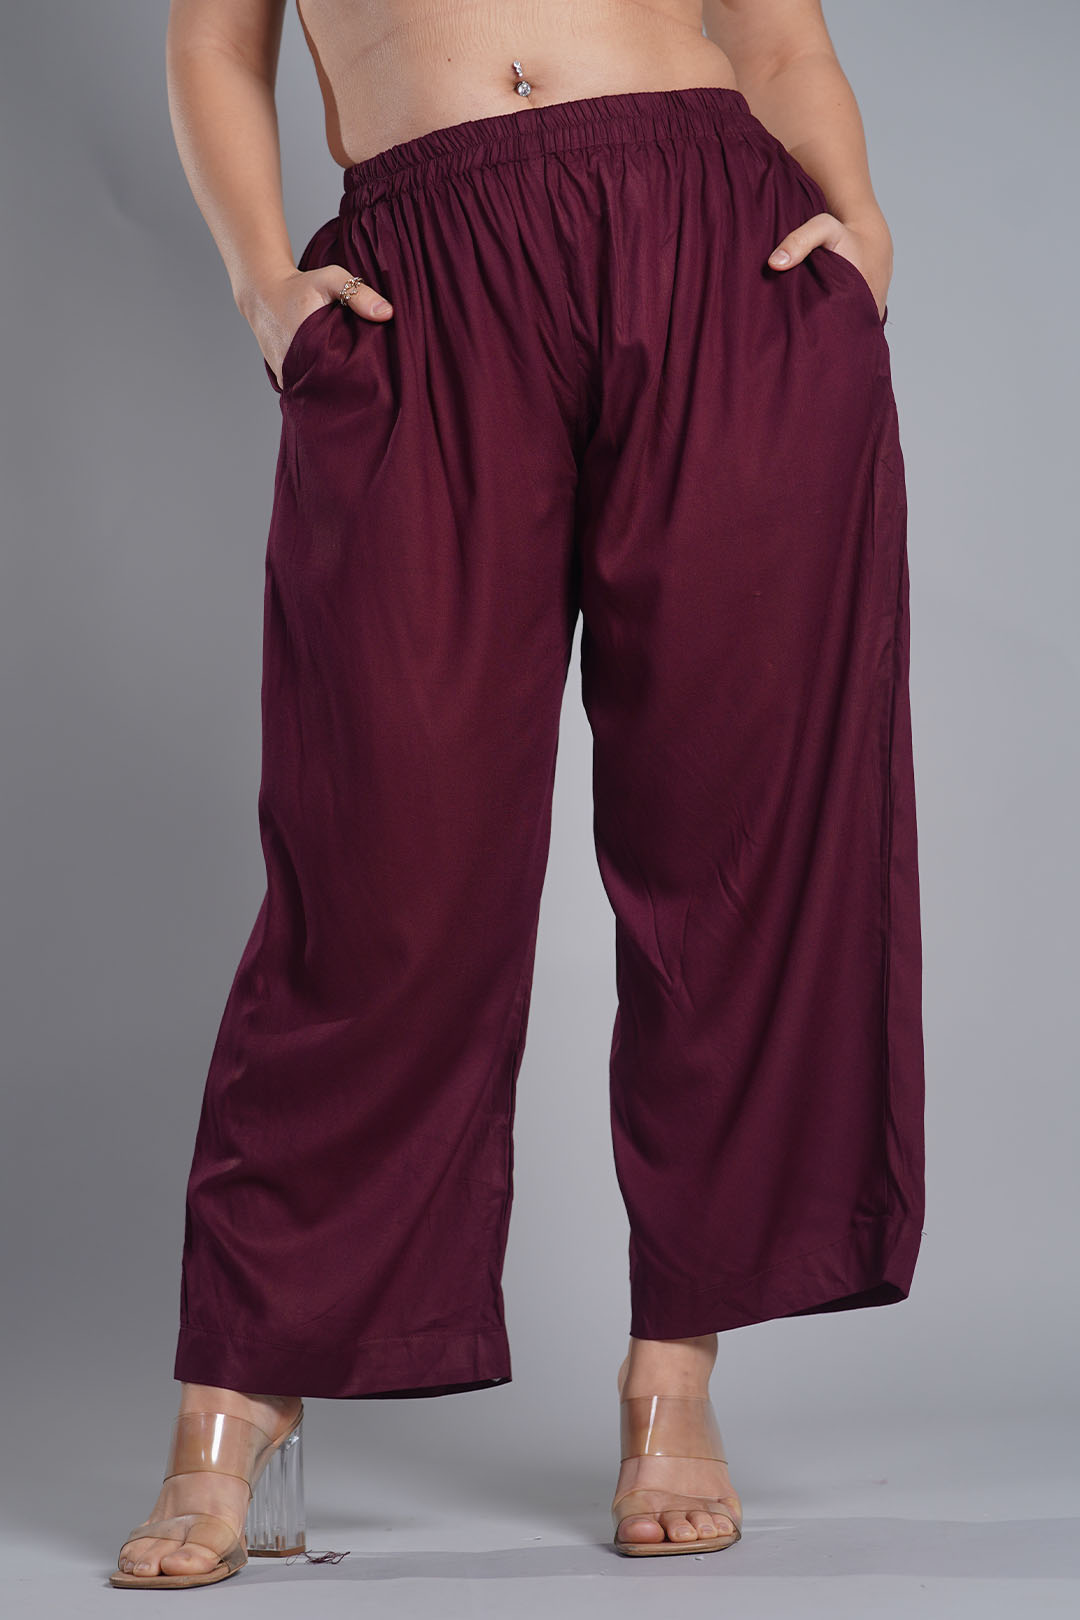 LetsDressUp Palazzo Pants for Women, XS to 8XL